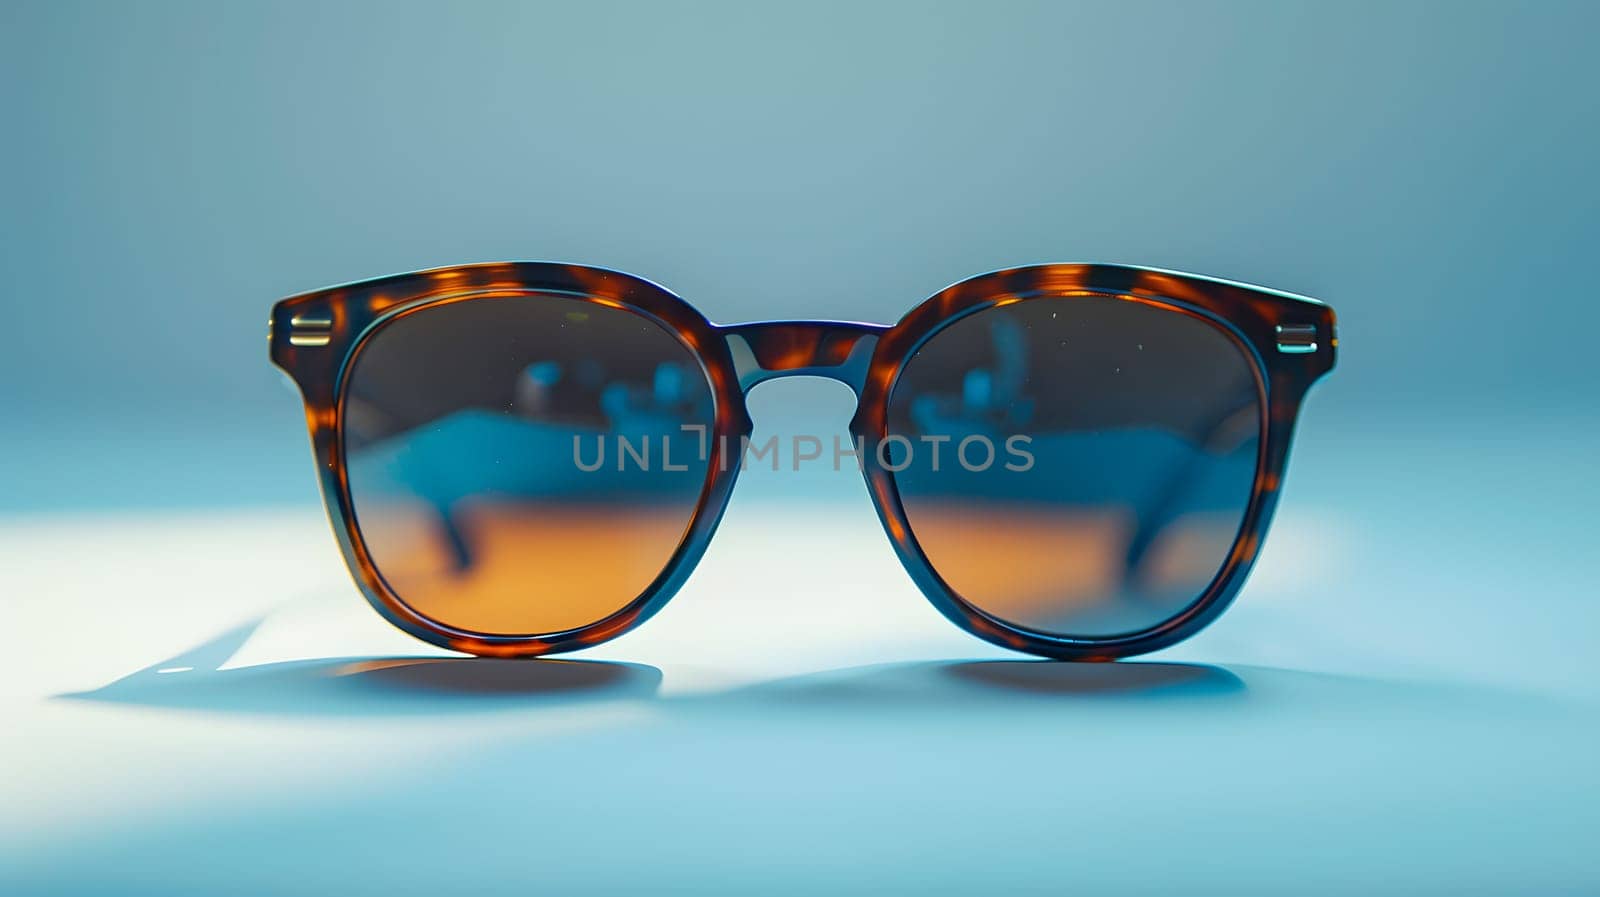 Sunglasses resting on blue surface, eye glass accessory by Nadtochiy